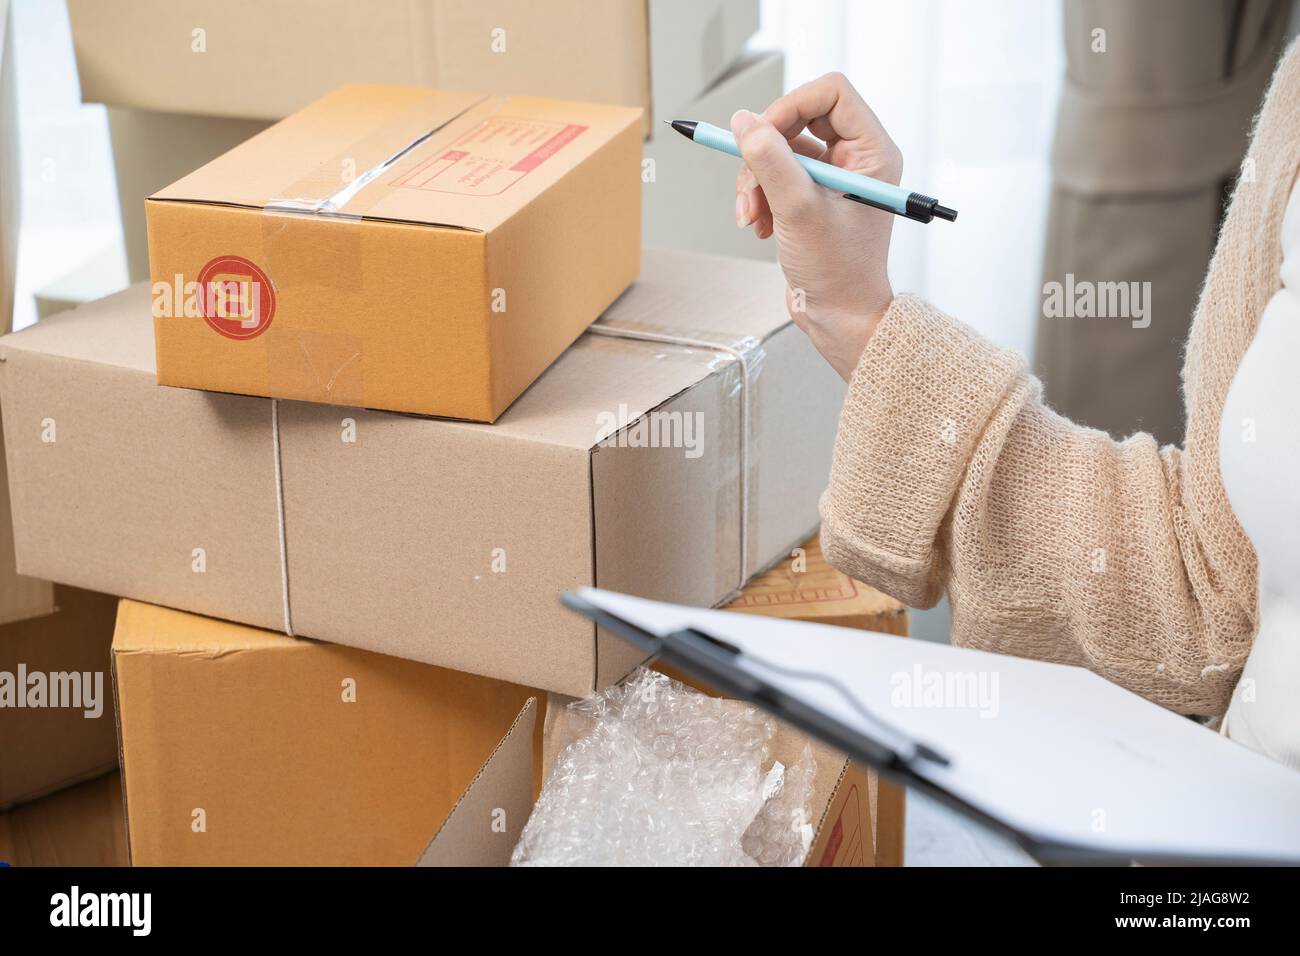 Asian woman packing in boxes to work at home Small Business Owners or Startup Small Business Entrepreneurs working on online marketing shipping boxes. Stock Photo